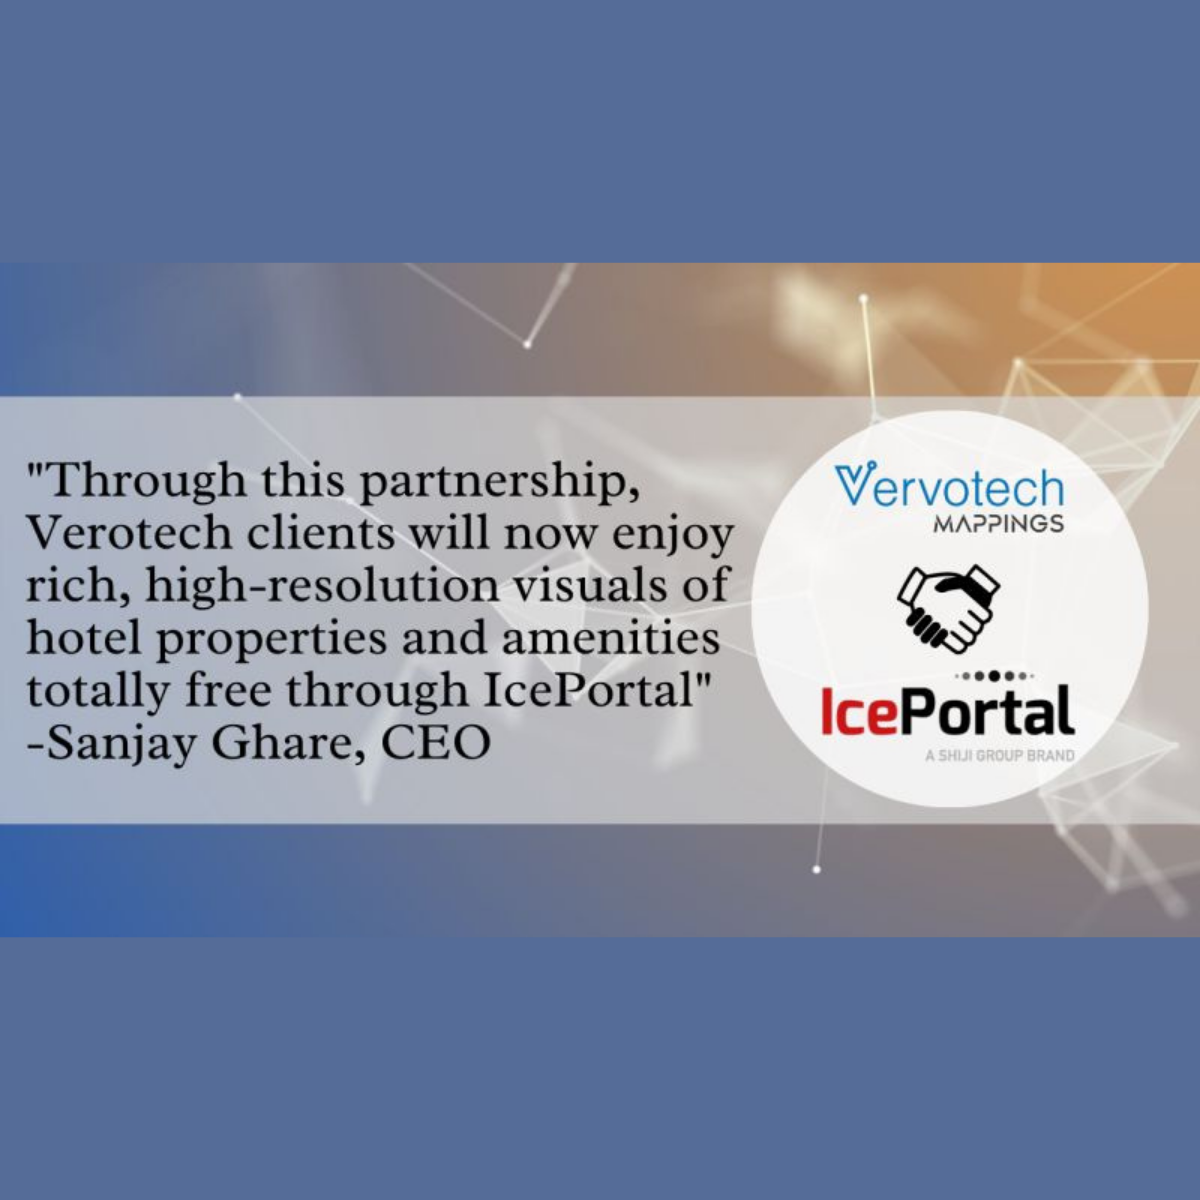 Vervotech Mappings partners with Shiji Distribution to provide visual media content to their travel industry partners